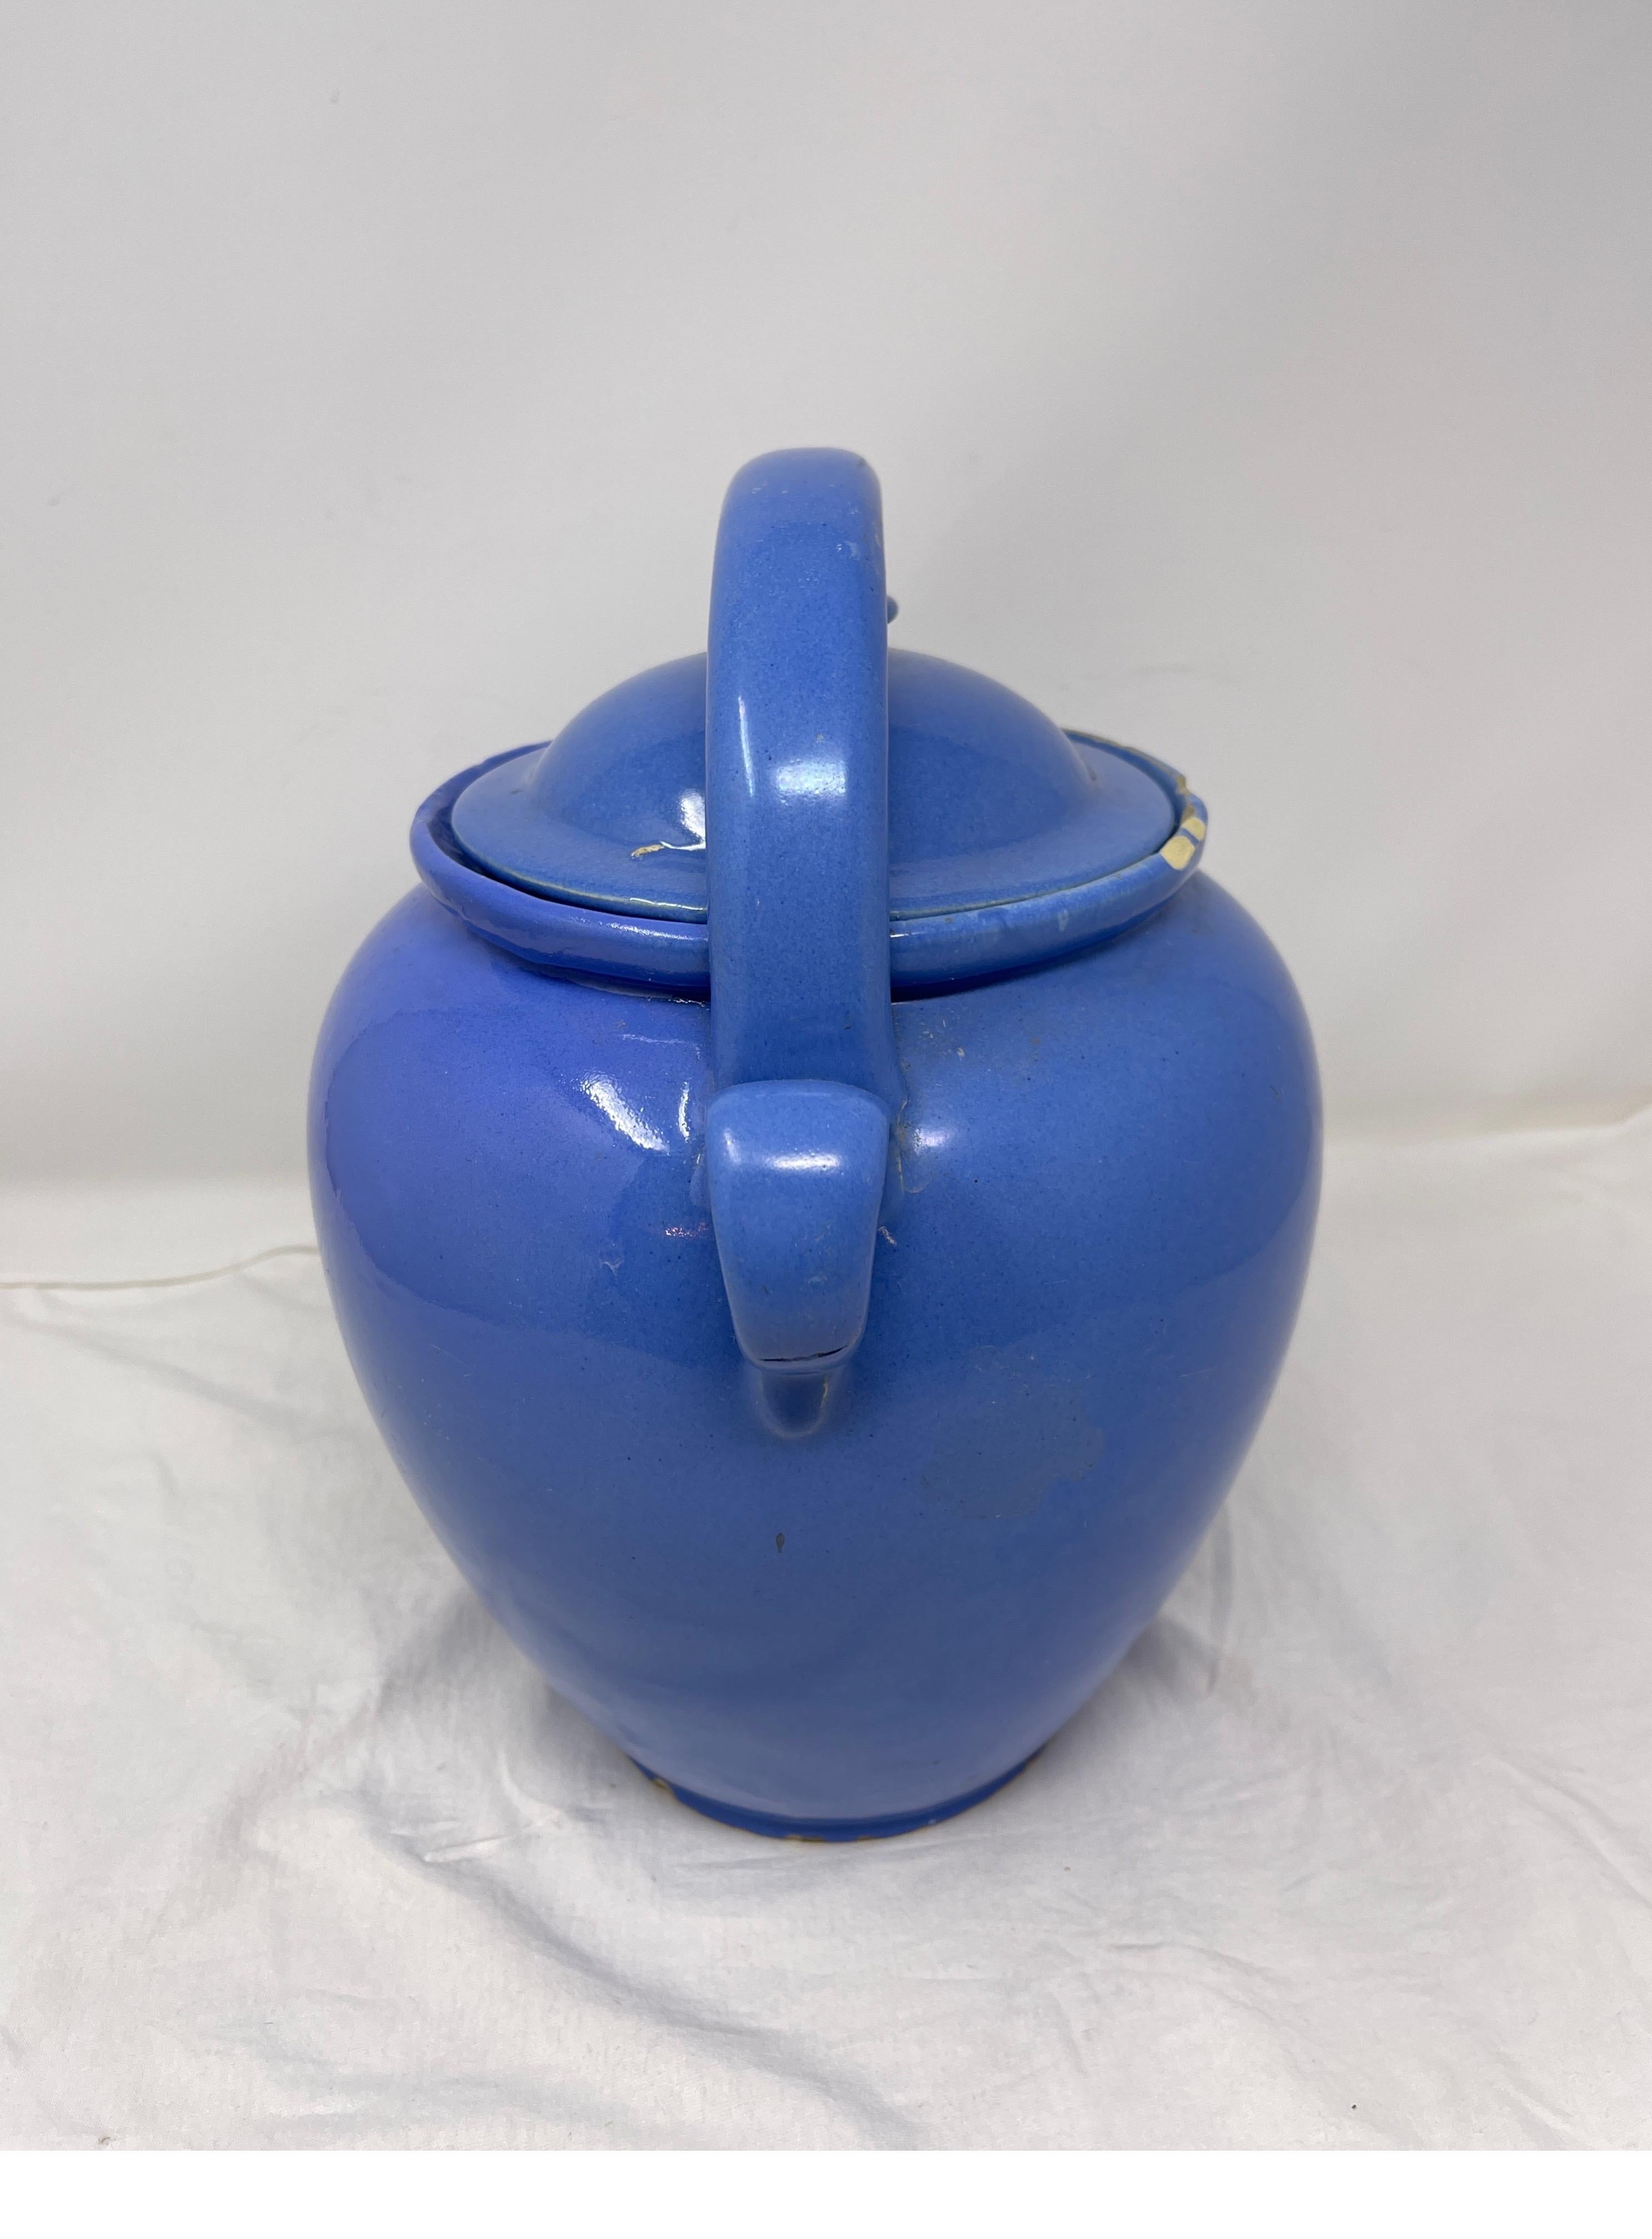 19th century French water pitcher cruche orjol with blue glaze. 

Measures: 10 1/2